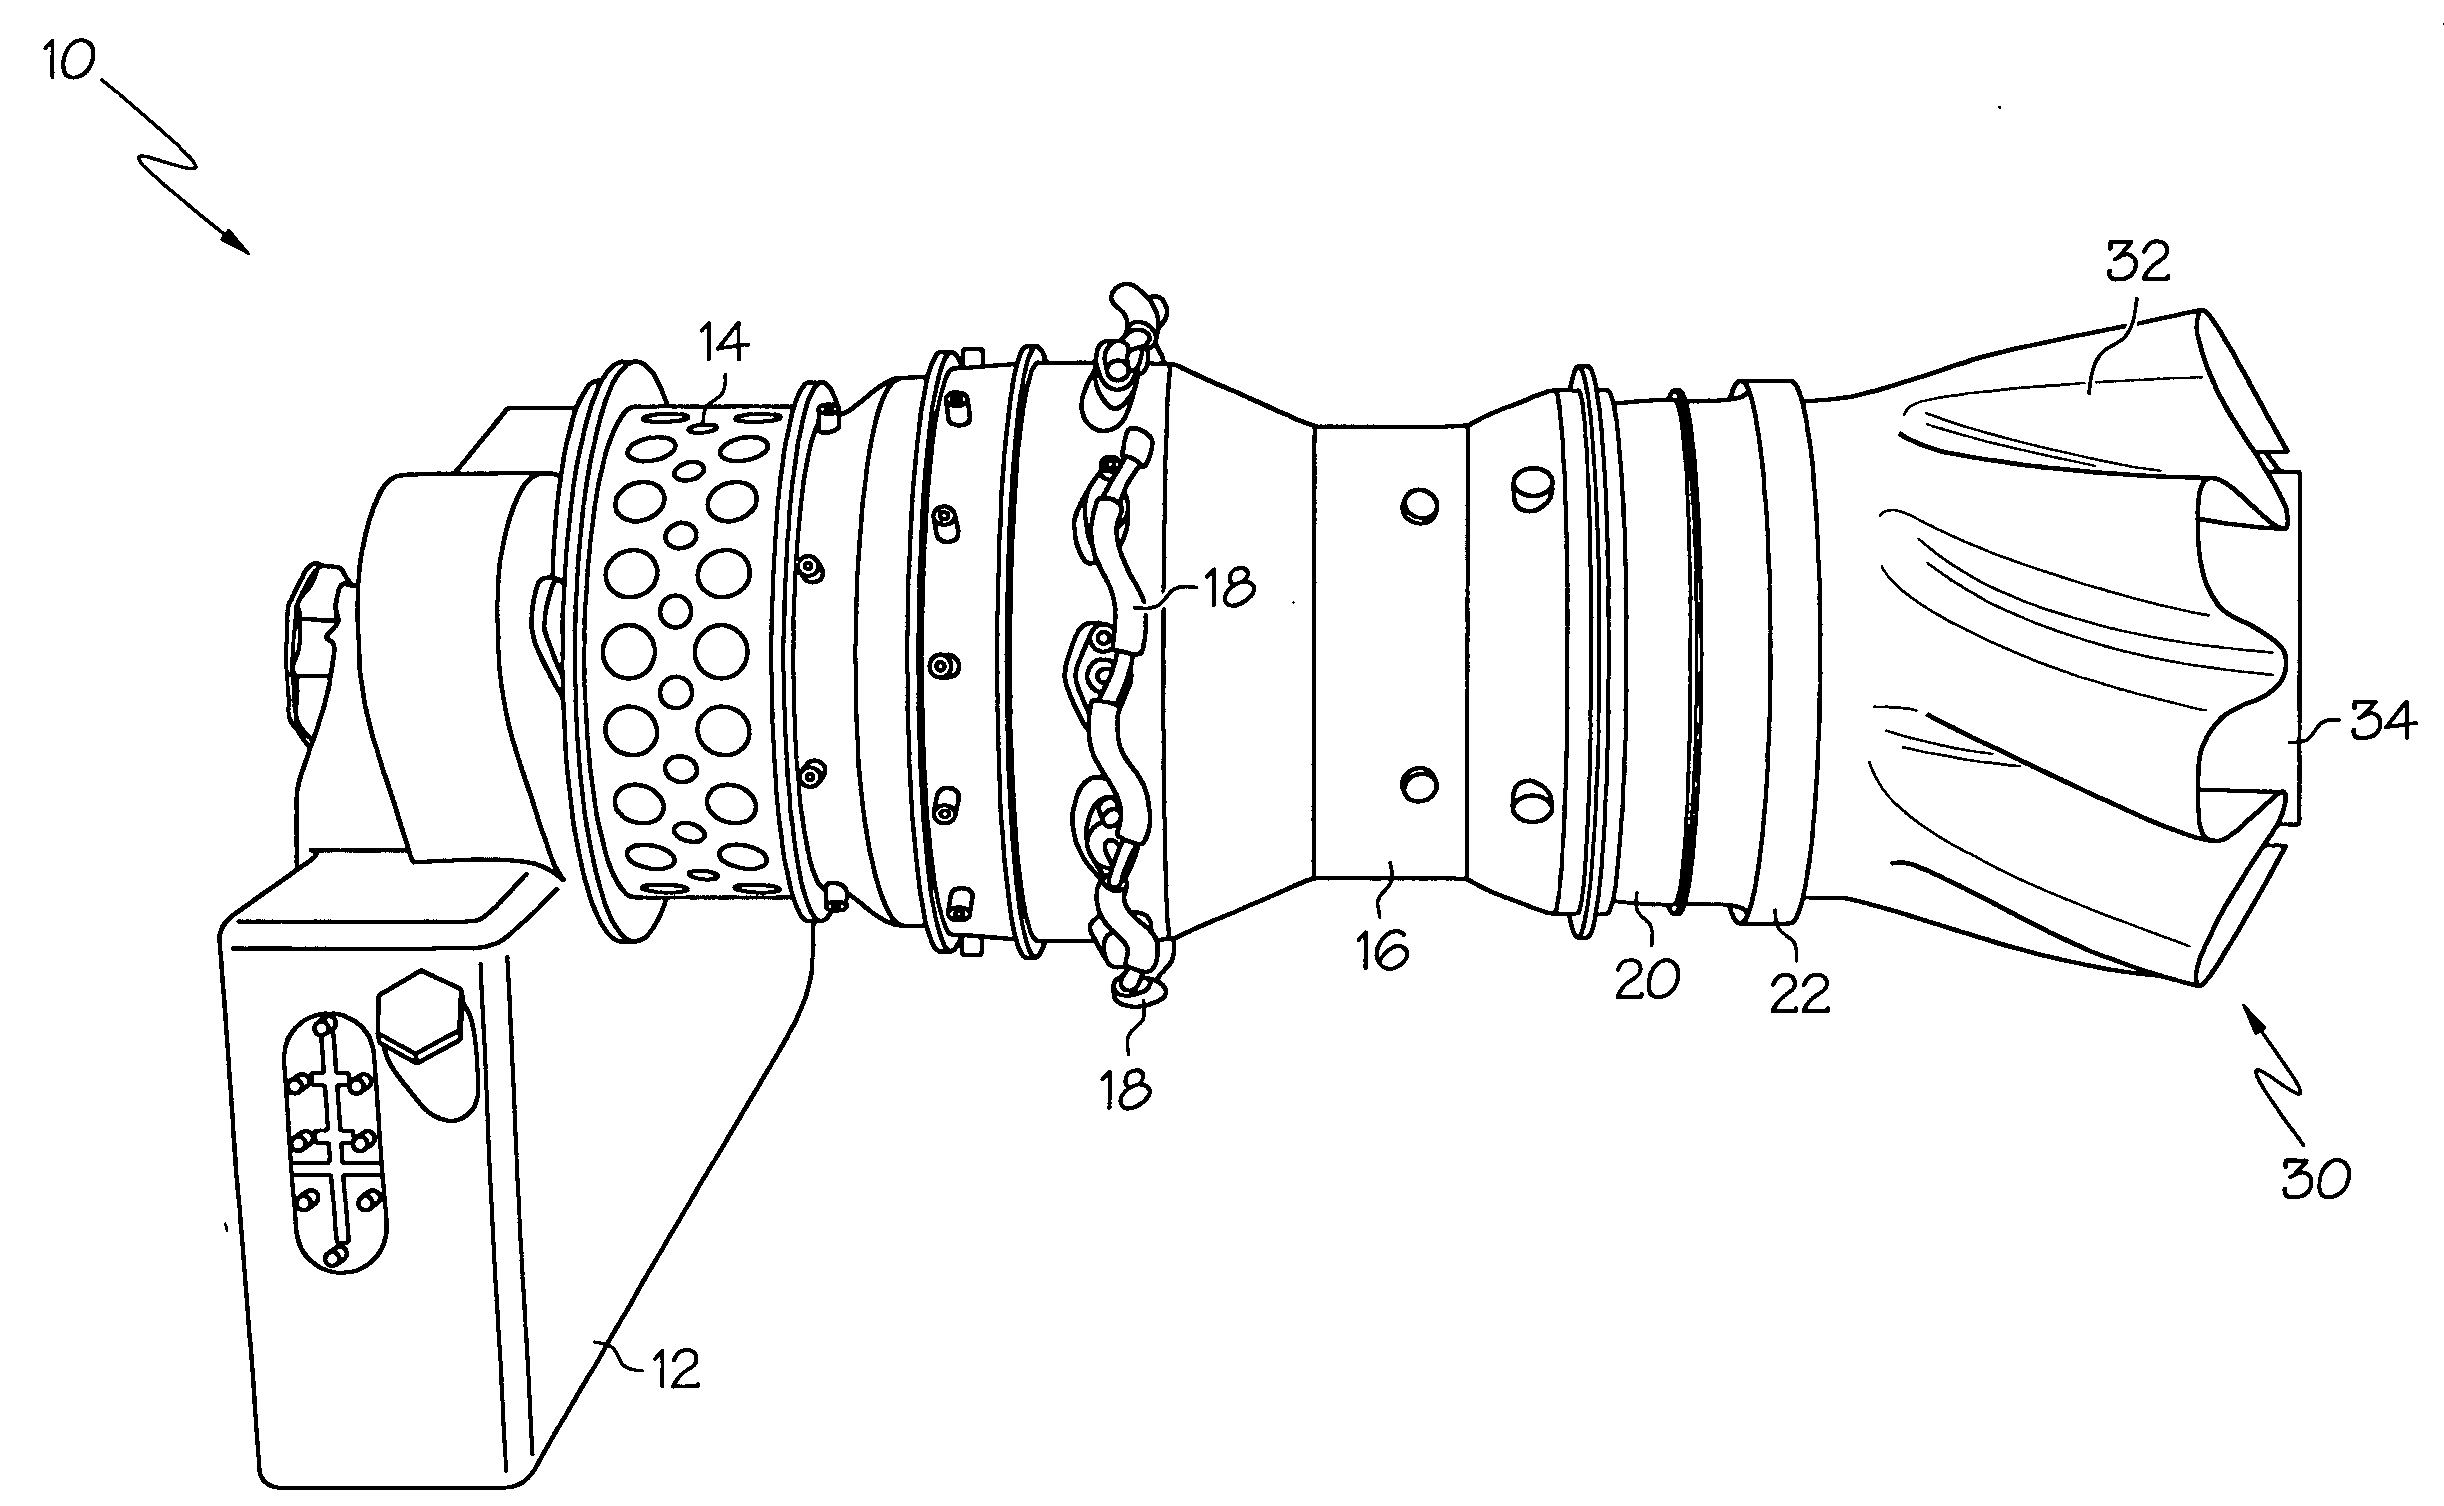 Twisted mixer with open center body